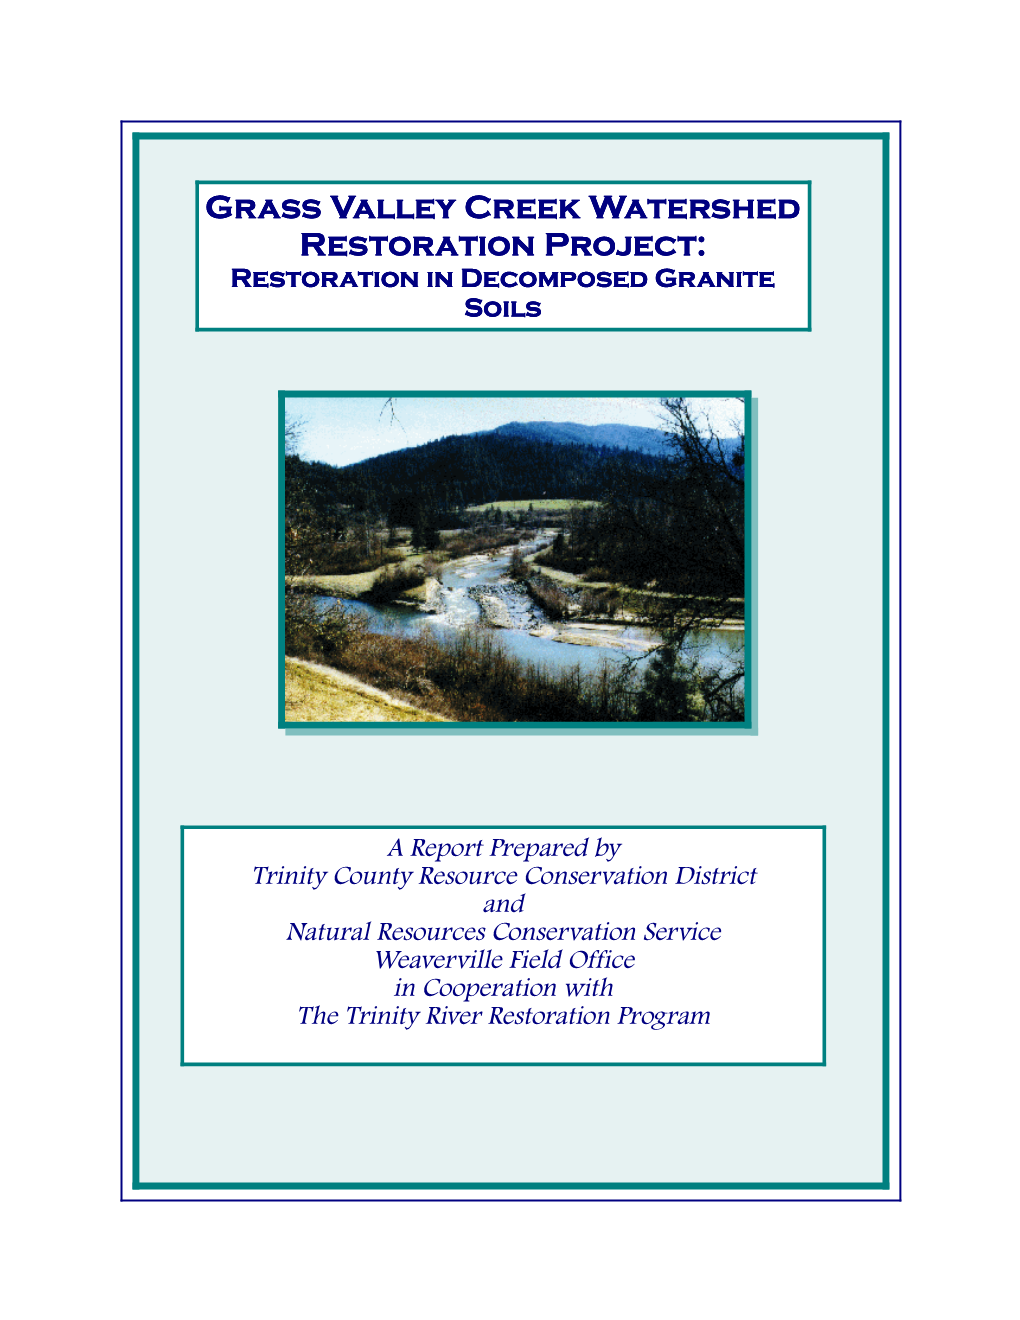 Grass Valley Creek Watershed Restoration Project: Restoration in Decomposed Granite Soils